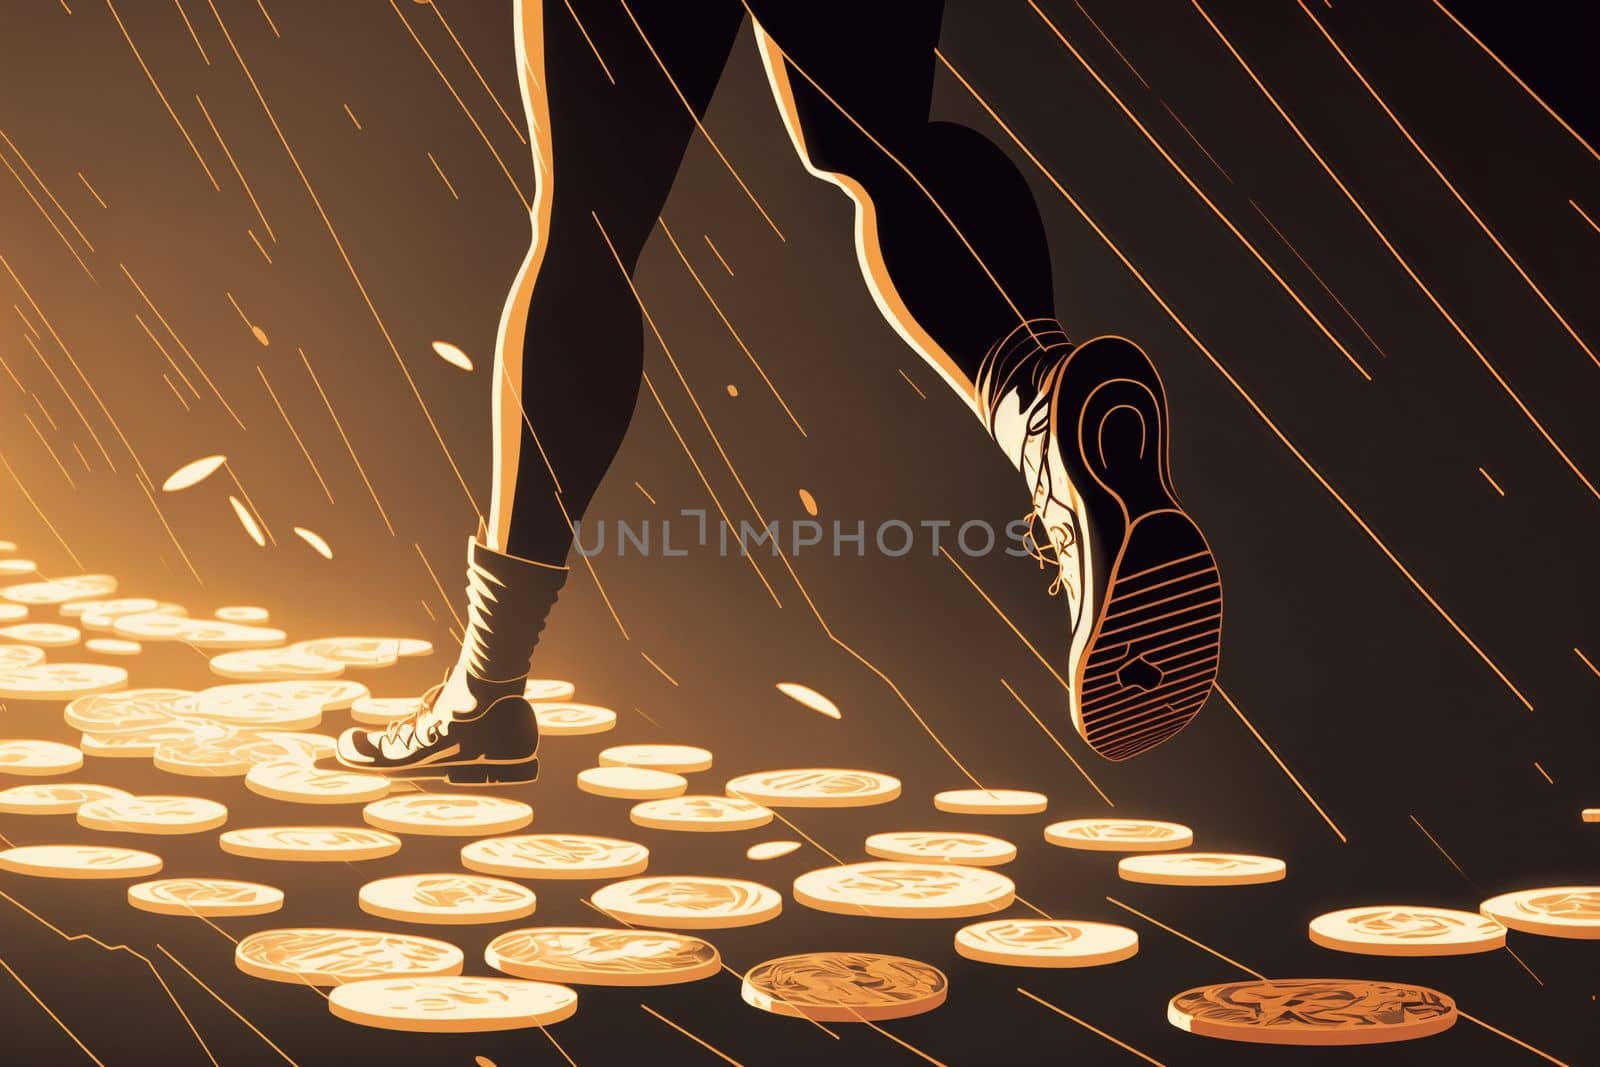 earn. NFT Sneakers. Woman running and earning cryptocurrency. 3d illustration of the MOVE TO EARN trend in the crypto industry by gulyaevstudio